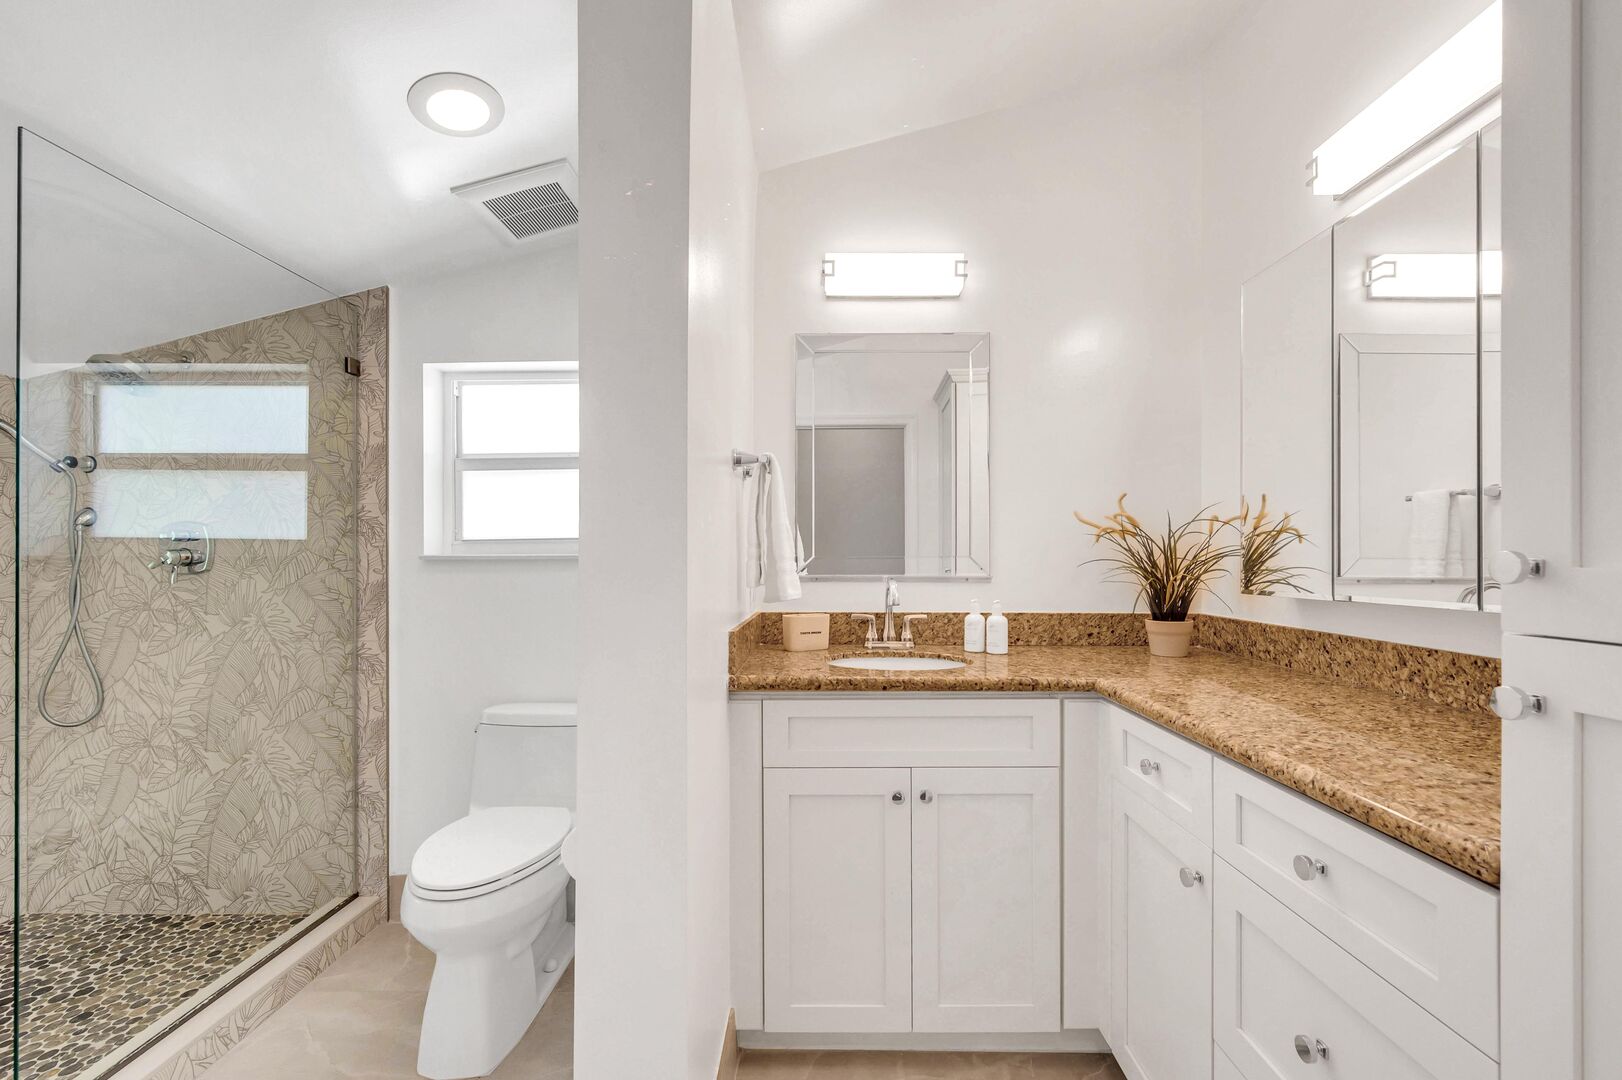 The upstairs bathroom features a walk-in shower.